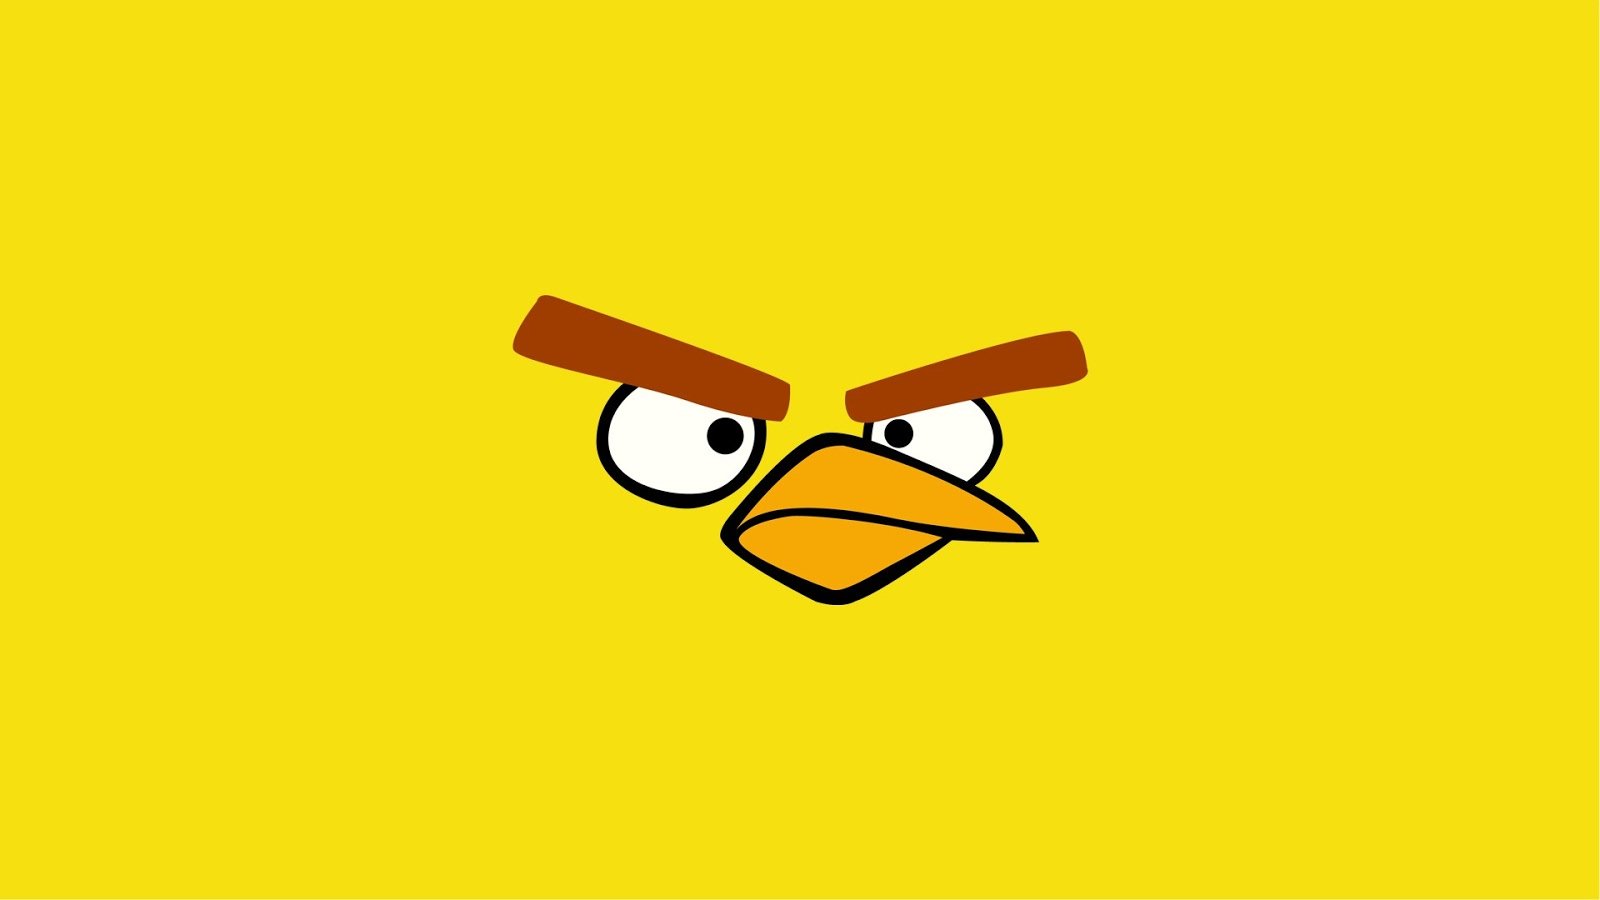 8 Angry Birds Wallpapers Face Angry Birds Angry Birds